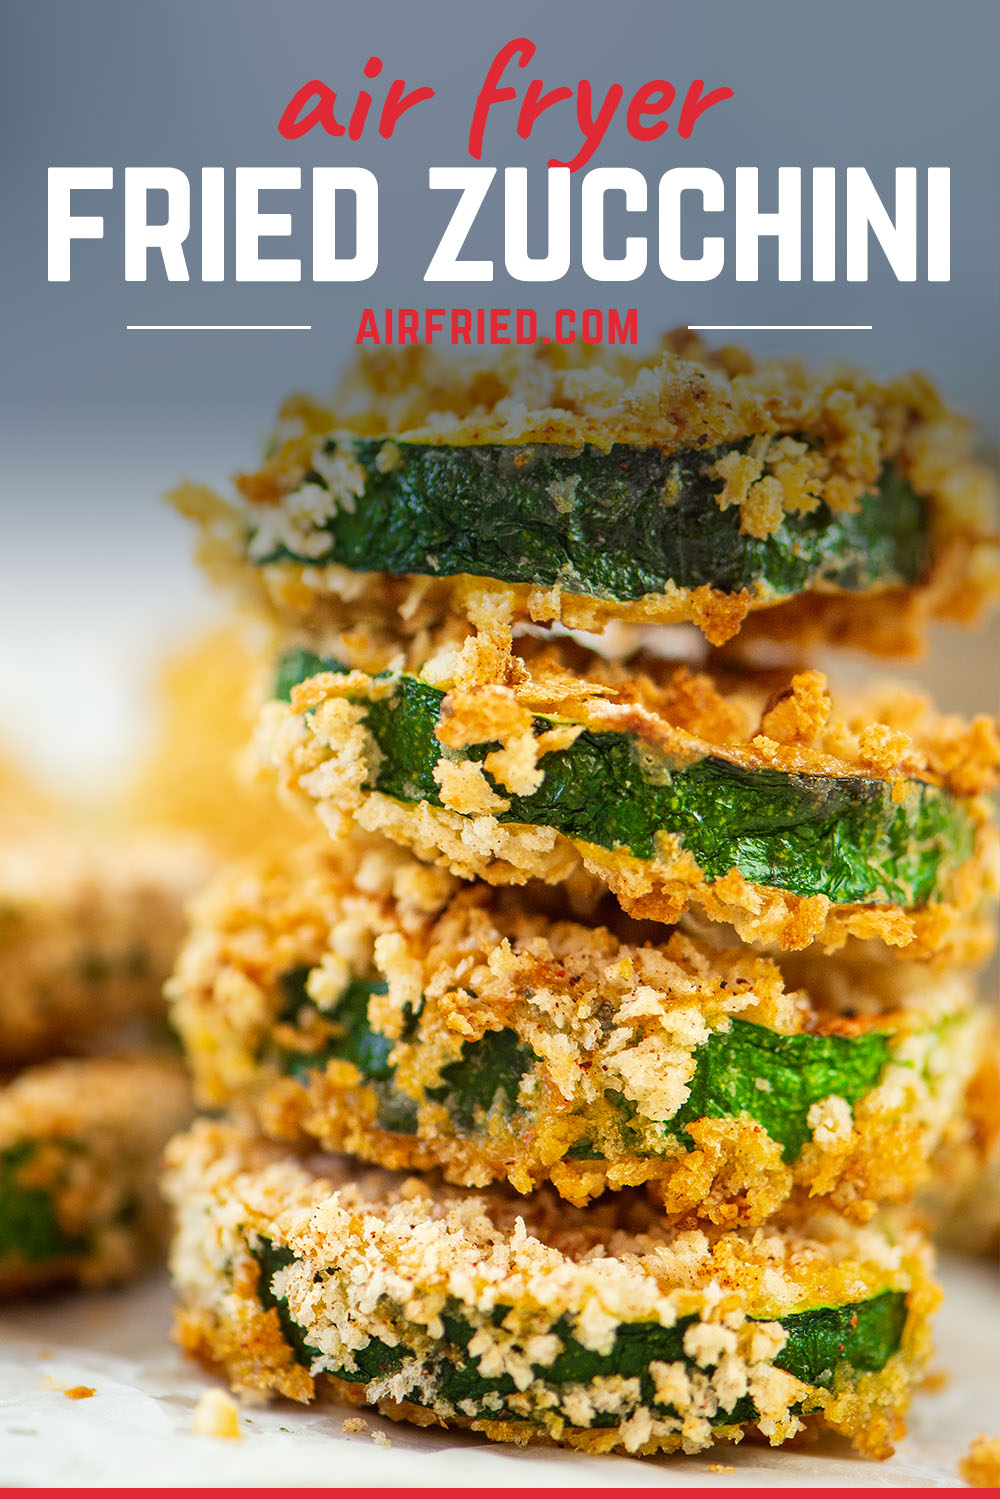 The crispy breading on this air fryer zucchini is really good and lightly seasoned!  Try this recipe out!